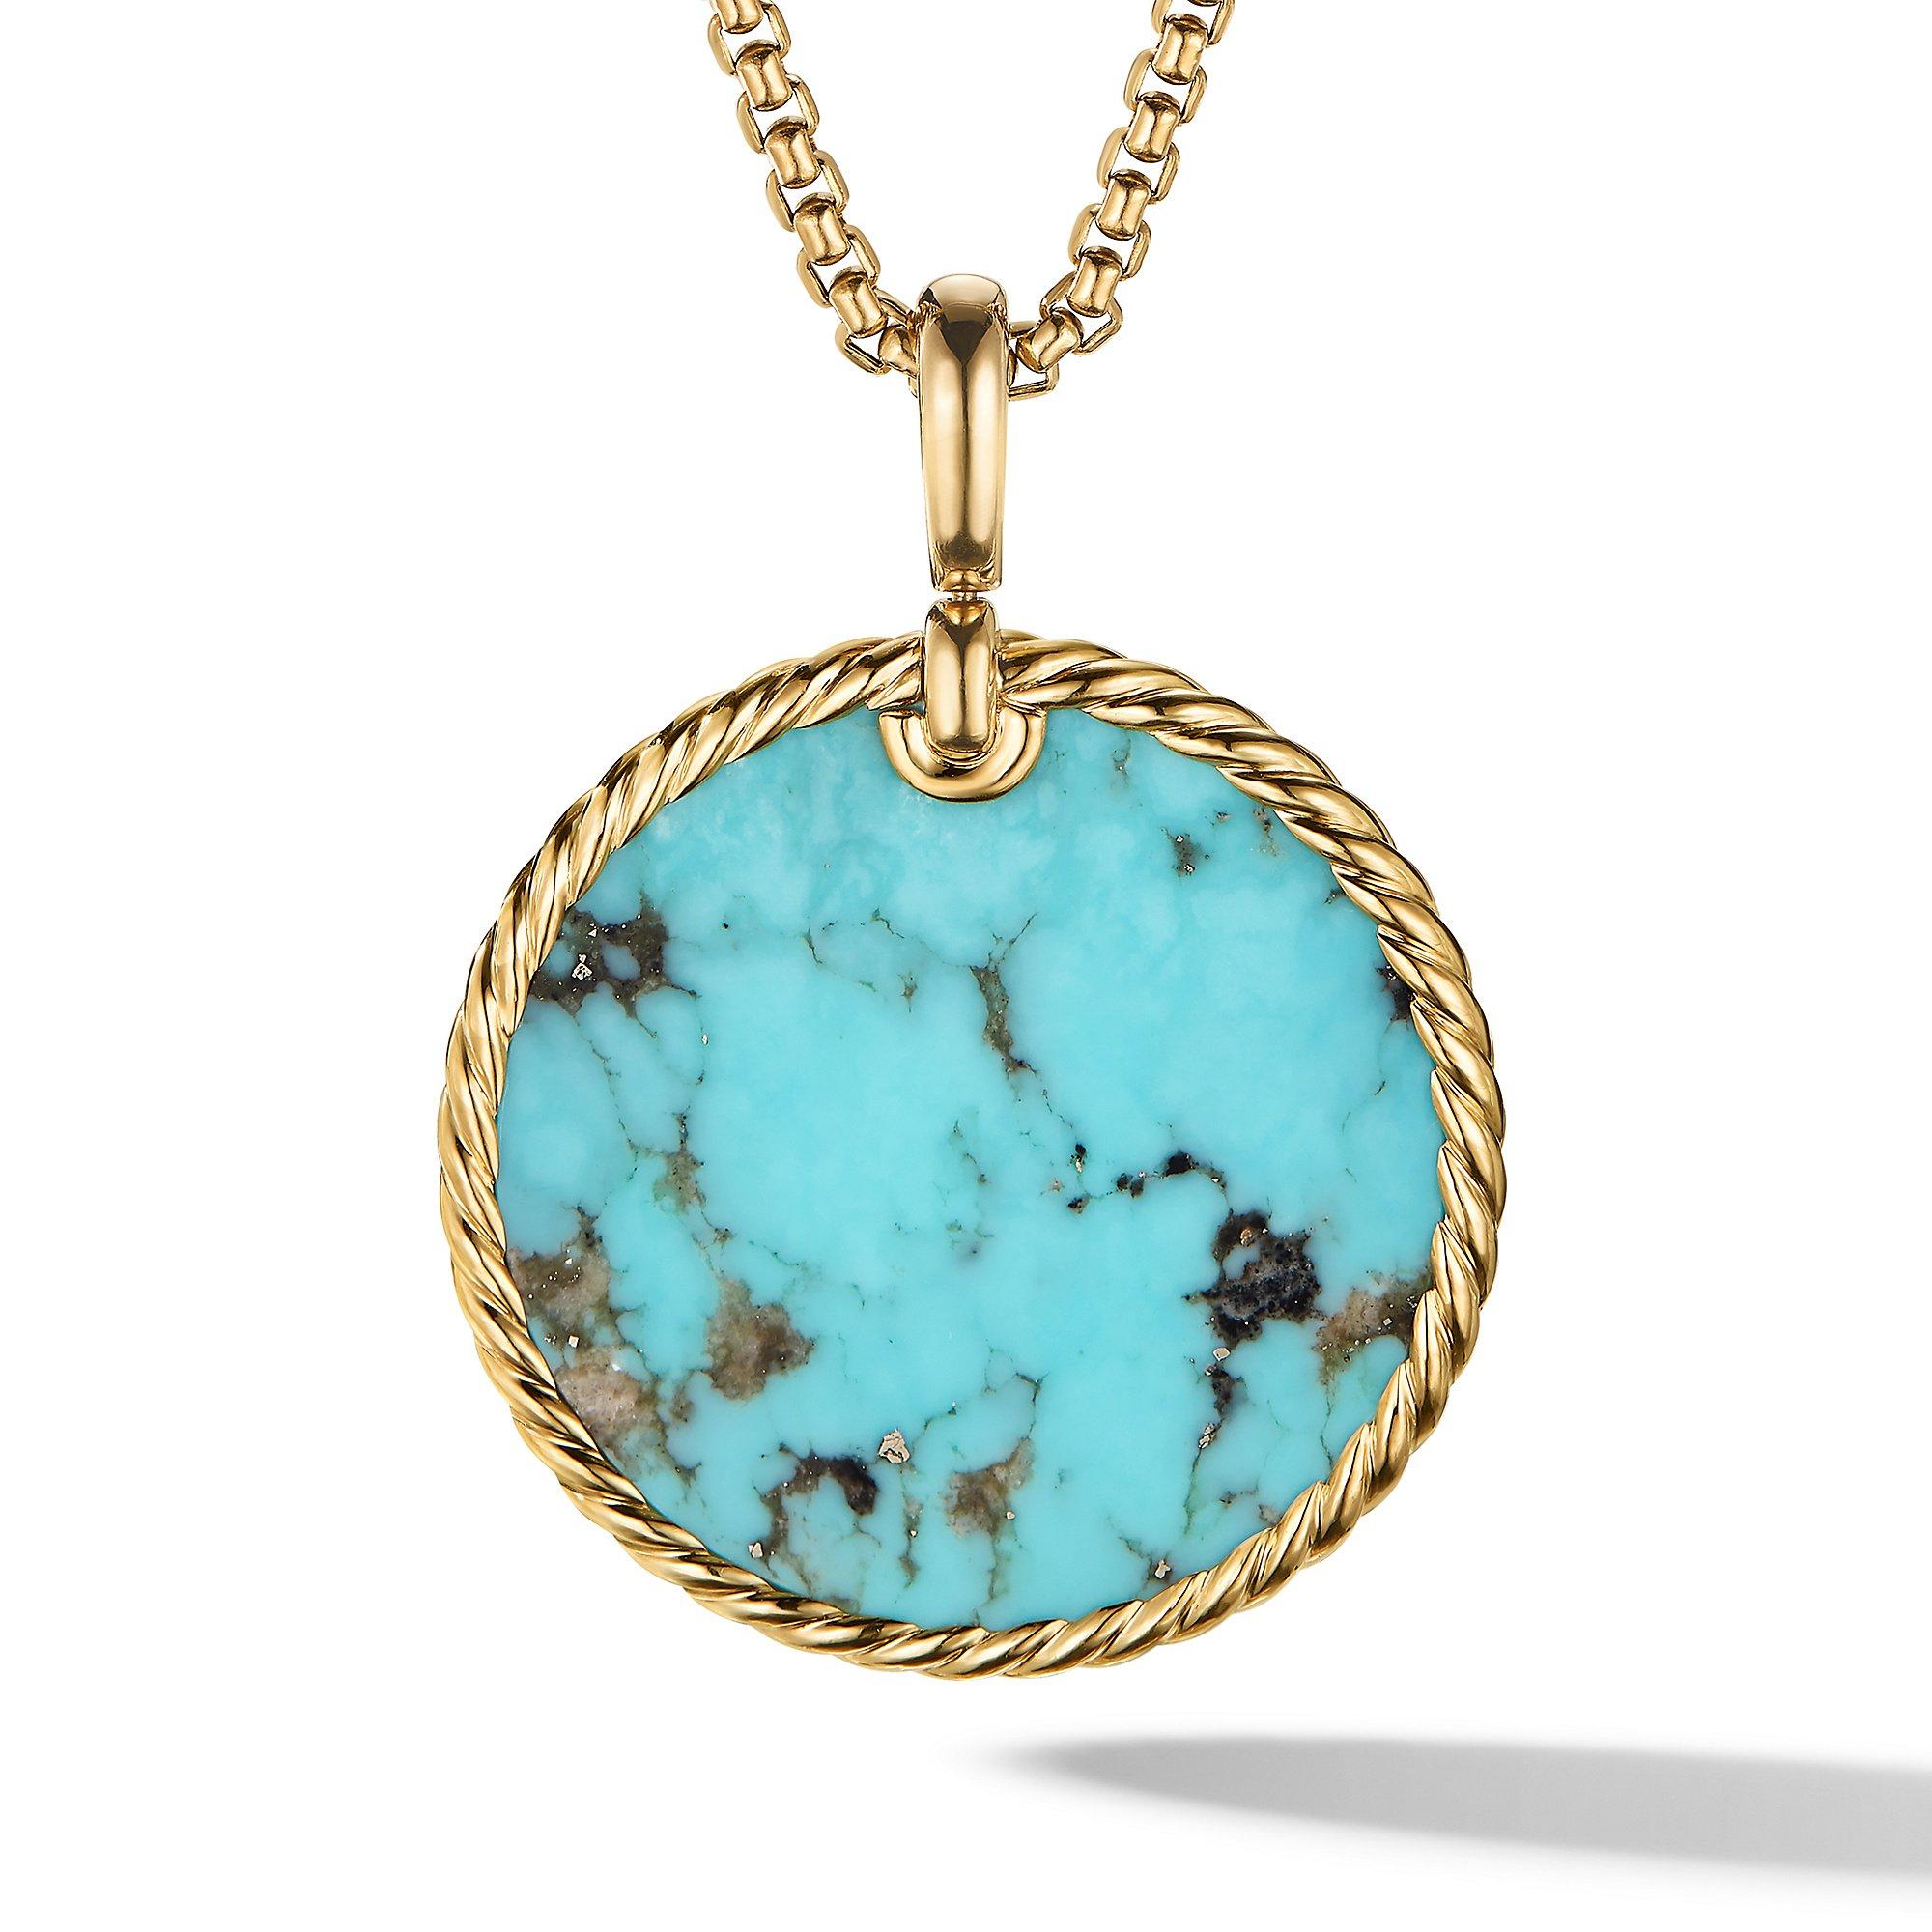 David Yurman DY Elements Disc Pendant in 18k Yellow Gold with Turquoise, 32mm